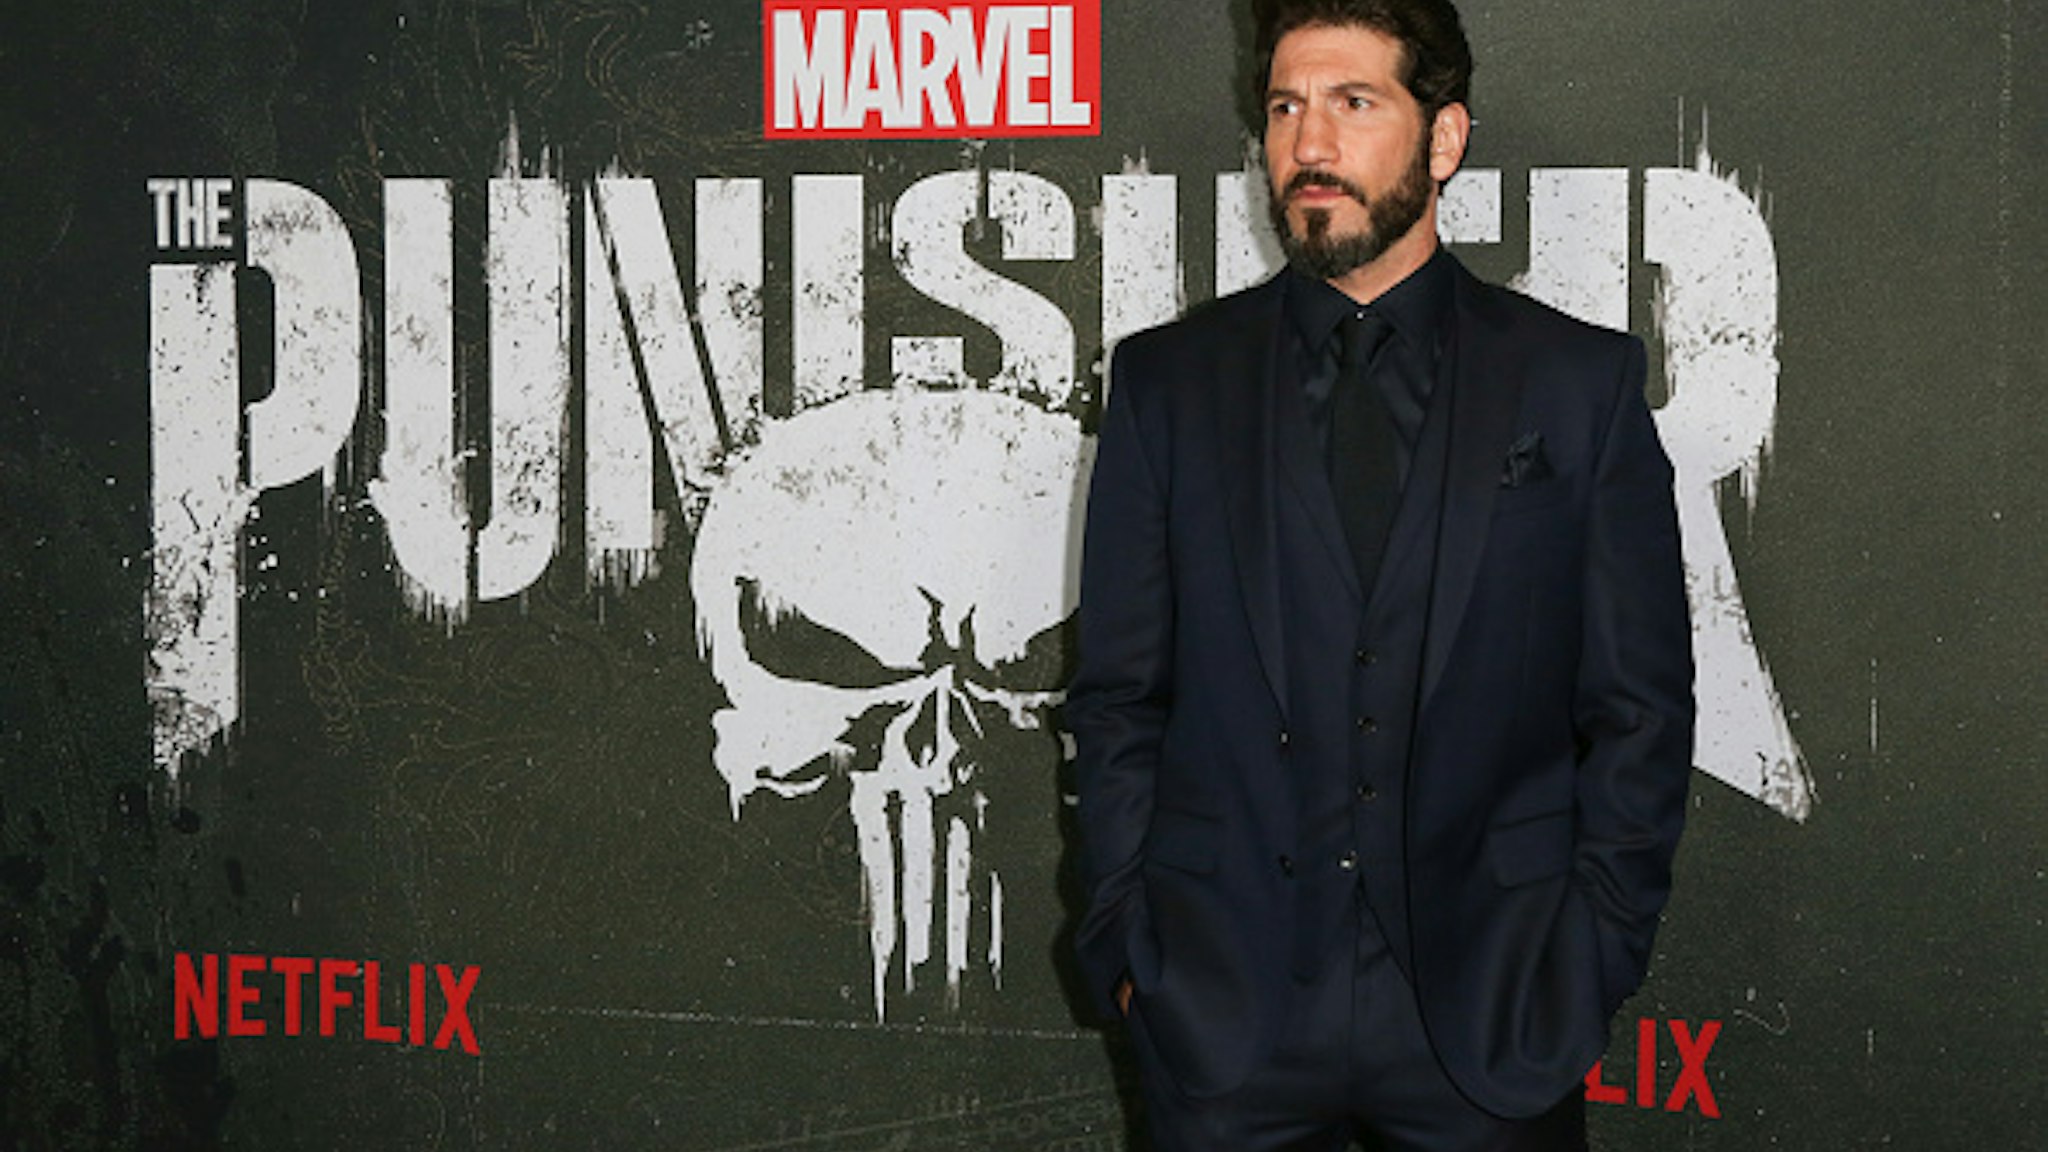 HOLLYWOOD, CALIFORNIA - JANUARY 14: Actor Jon Bernthal attends Marvel's "The Punisher" Los Angeles premiere at the ArcLight Hollywood on January 14, 2019 in Hollywood, California.